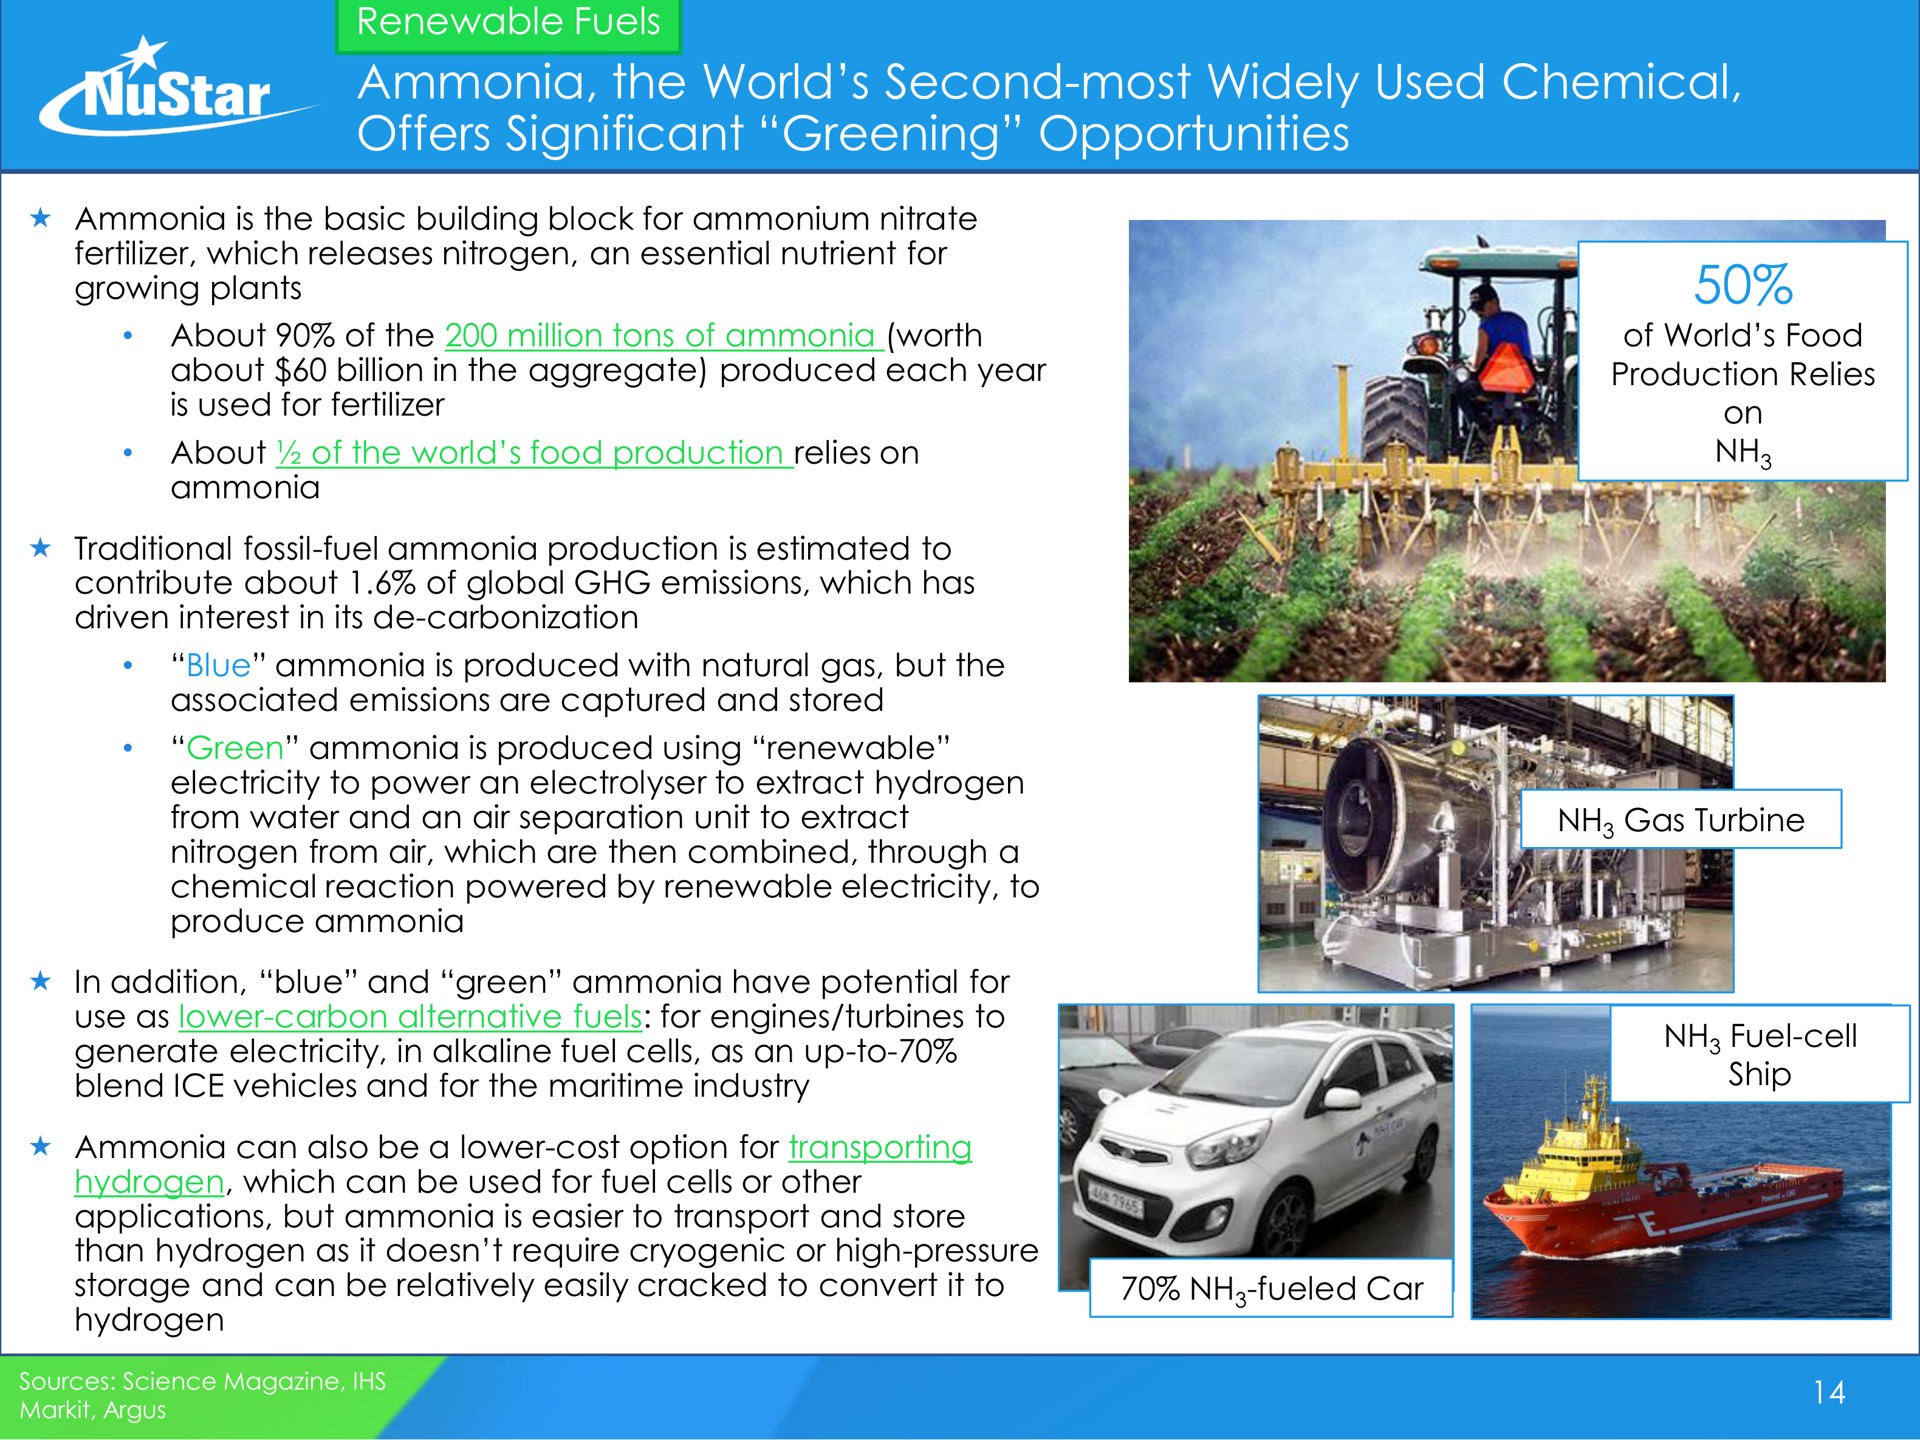 ammonia the world second most widely used chemical offers significant greening opportunities mast star | NuStar Energy